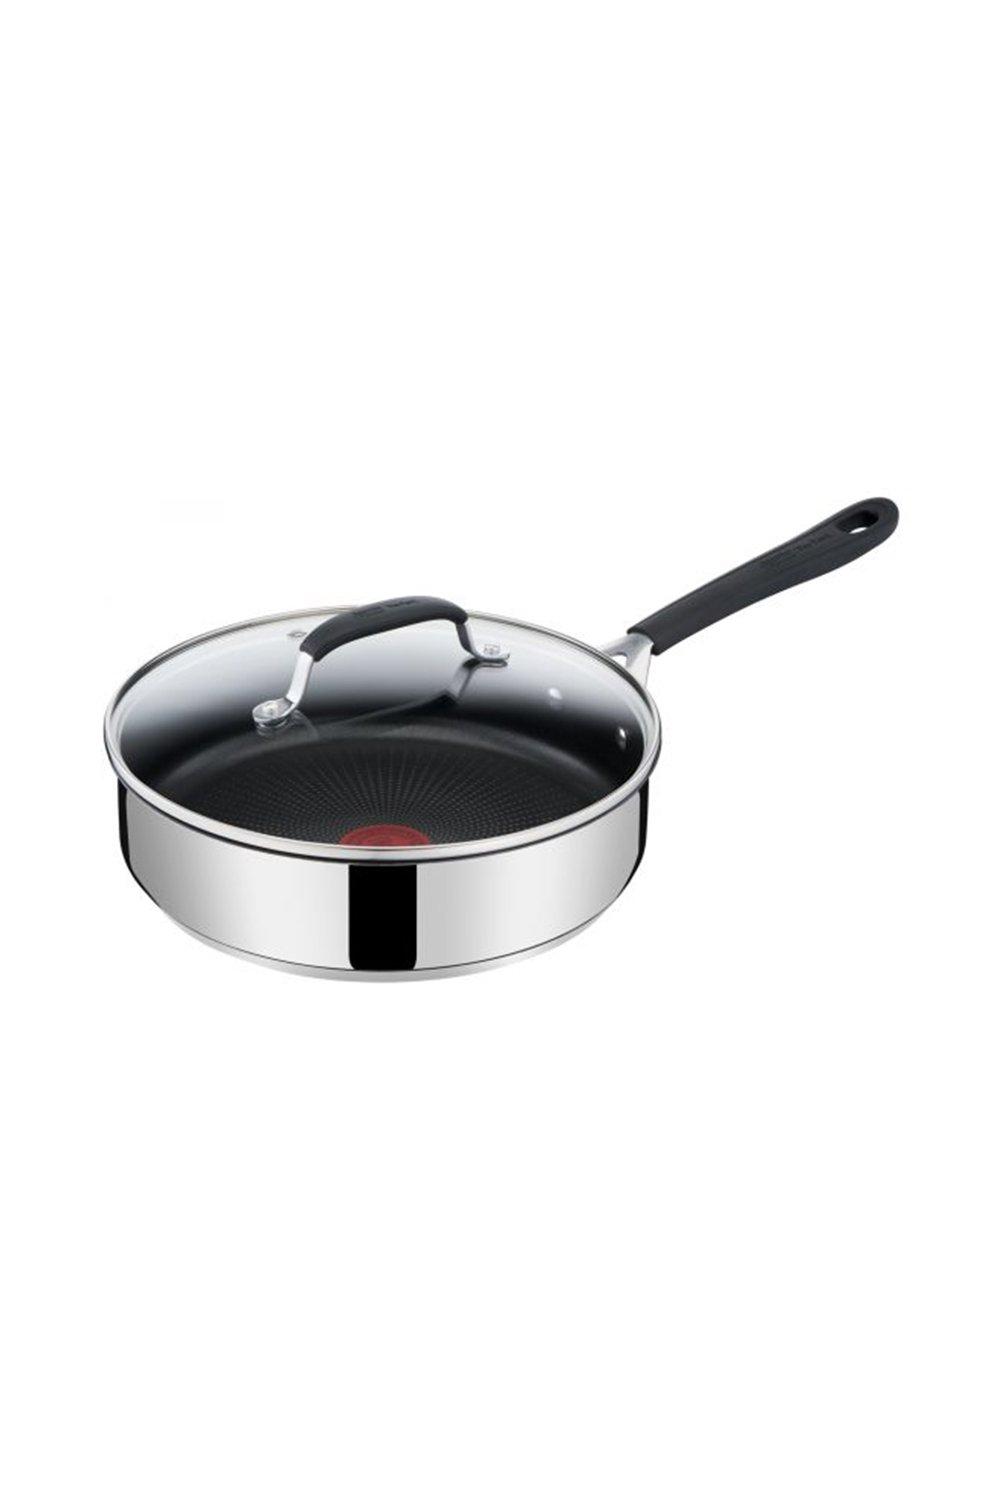 'Jamie Oliver' Quick And Easy Stainless Steel Sautepan 25cm